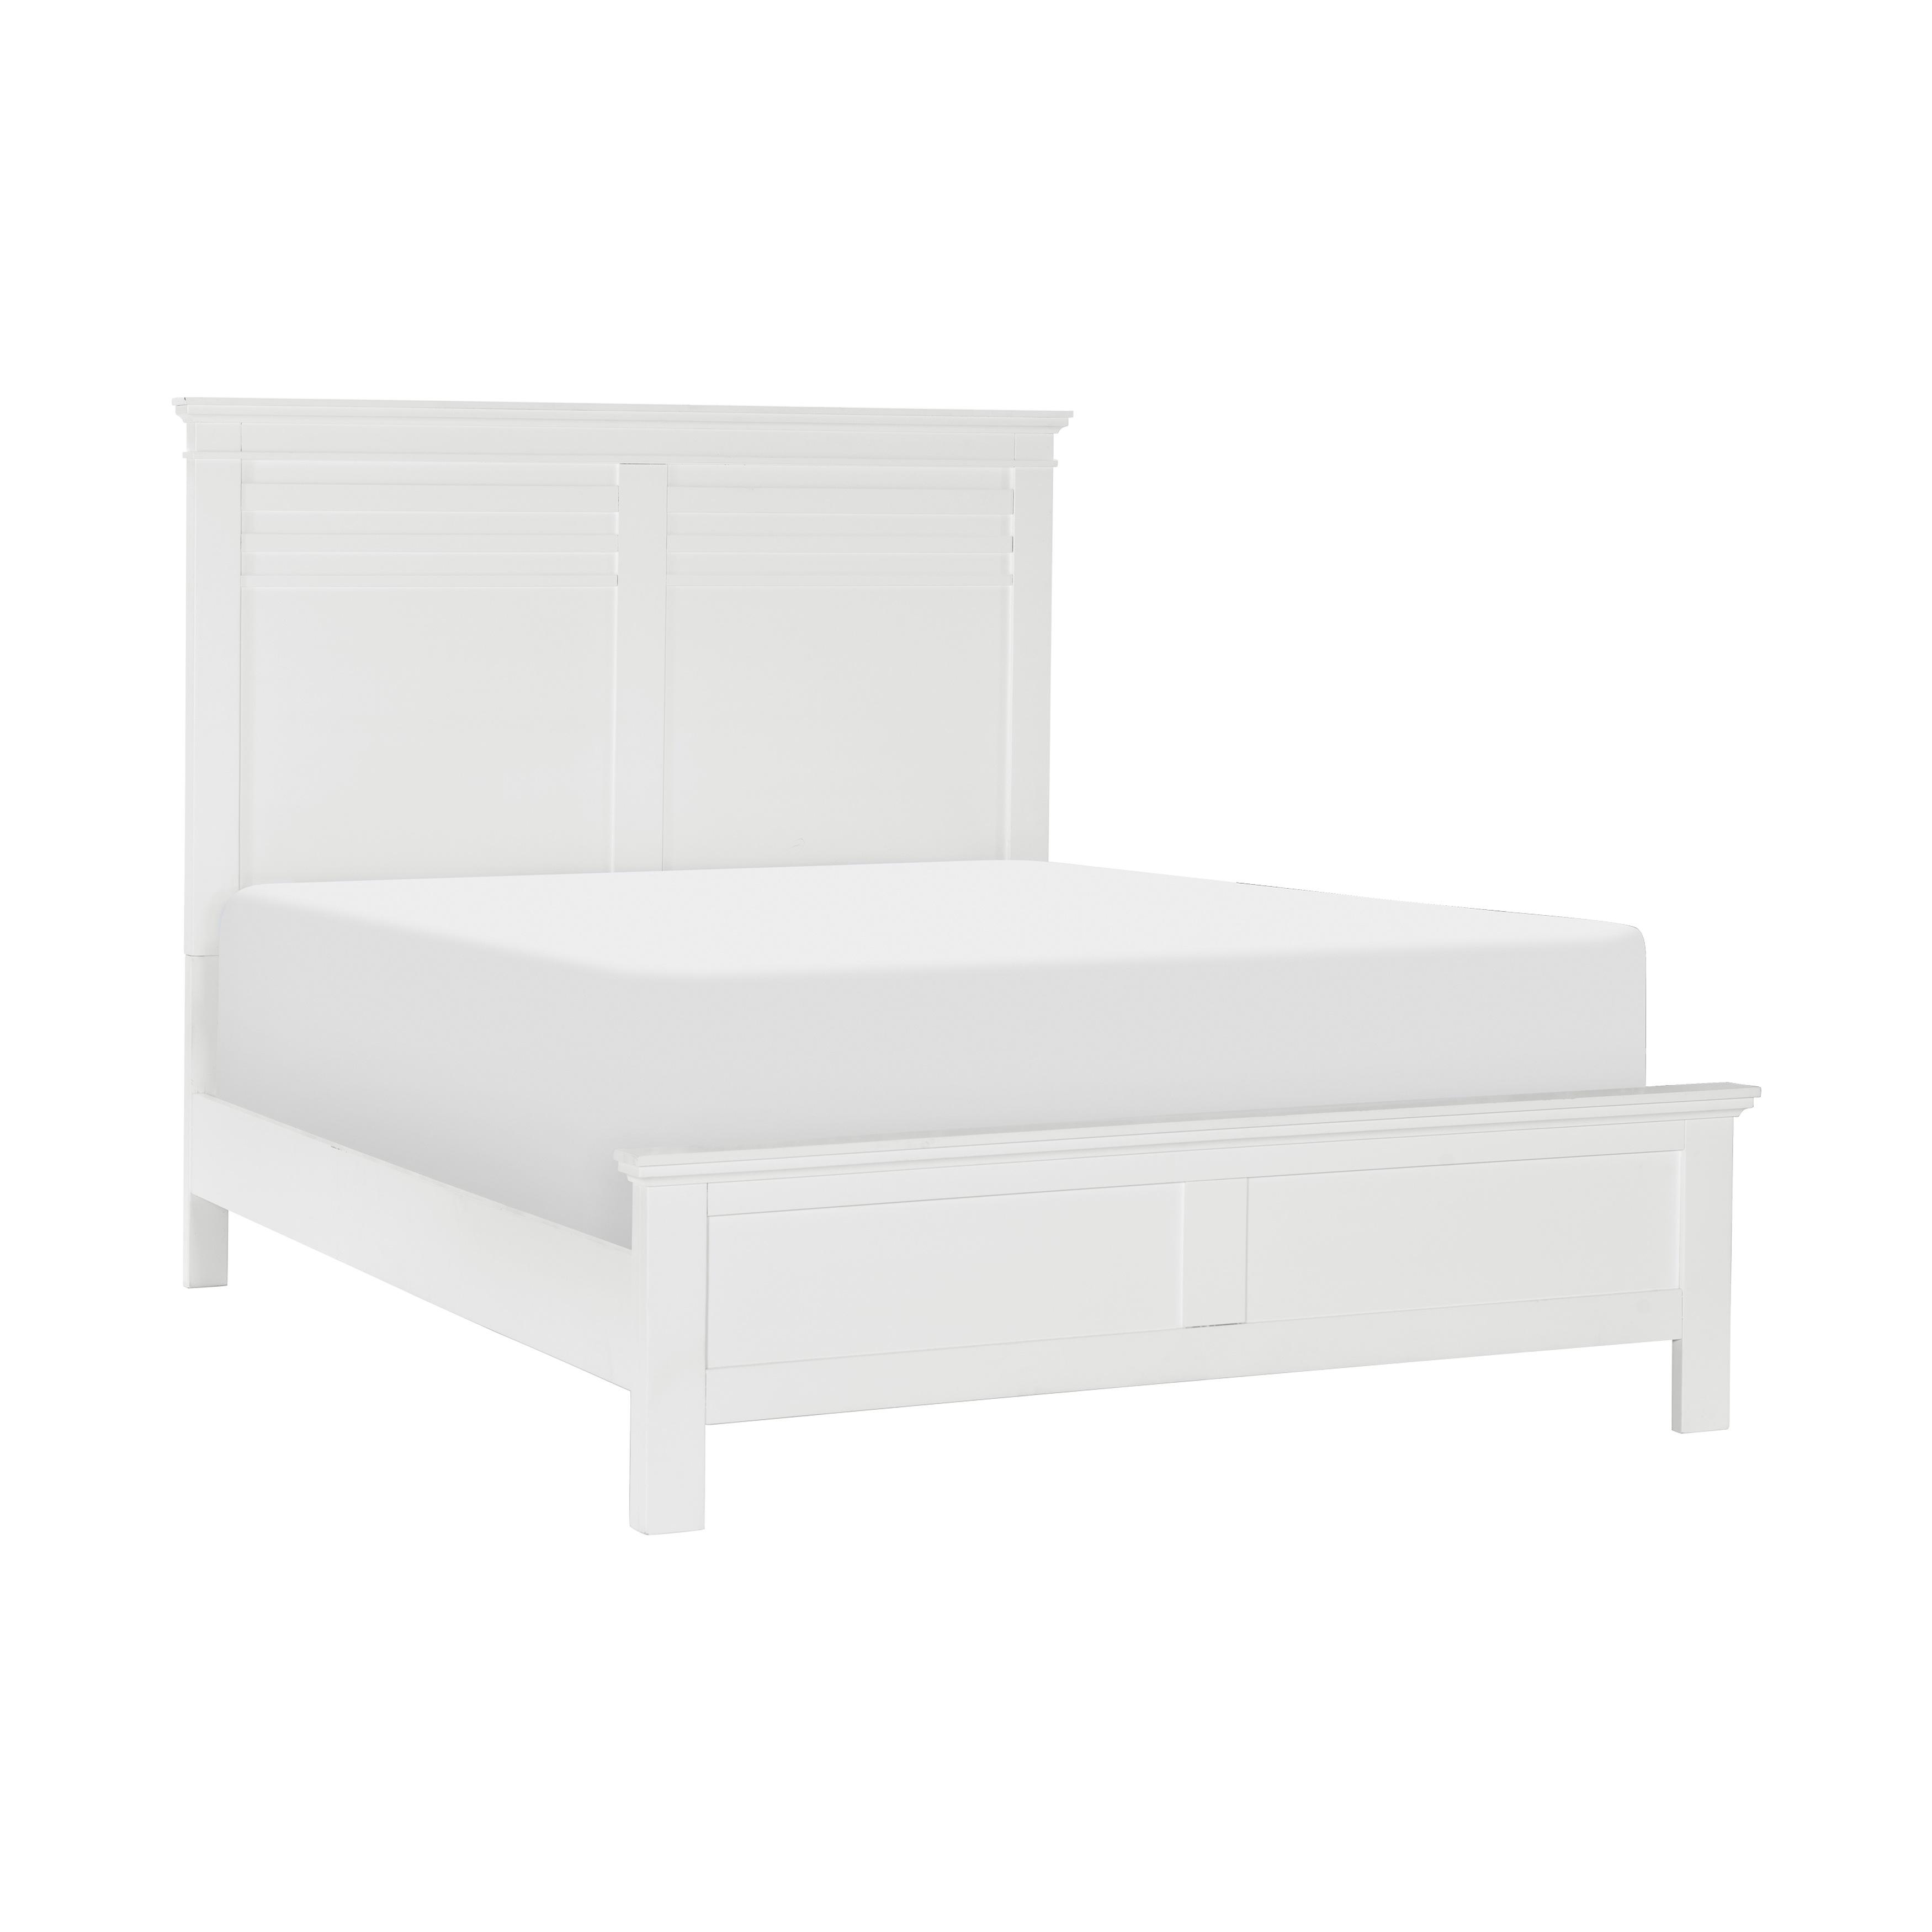 Transitional Bed 1675WK-1CK* Blaire Farm 1675WK-1CK* in White 